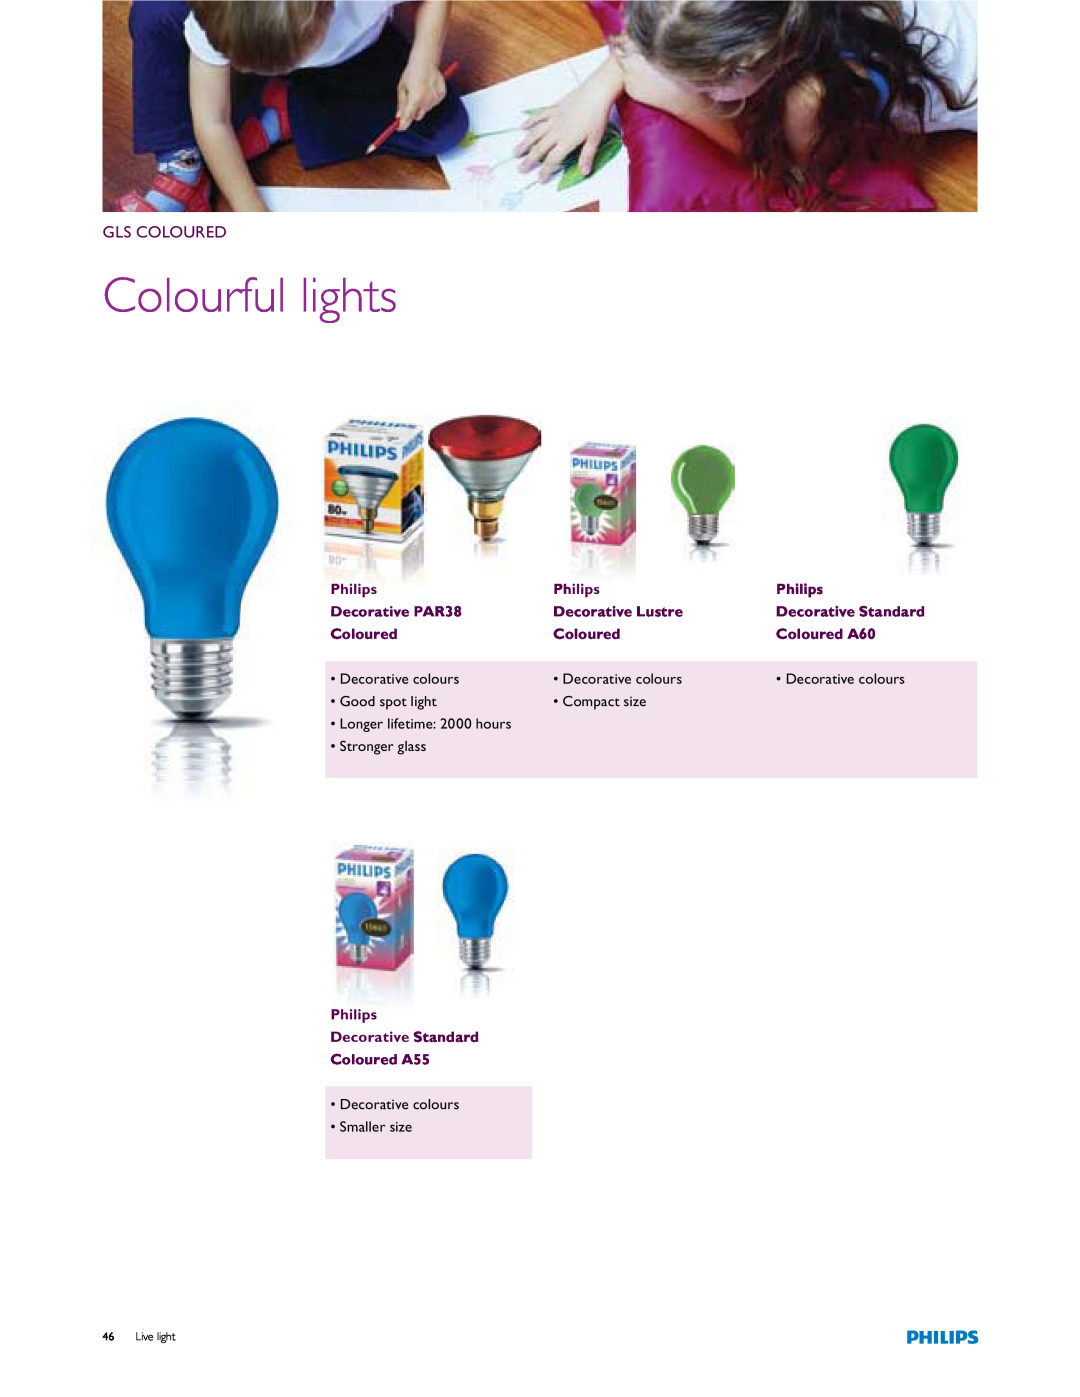 Philips Colourful Lights manual Gls Coloured, Colourful lights 